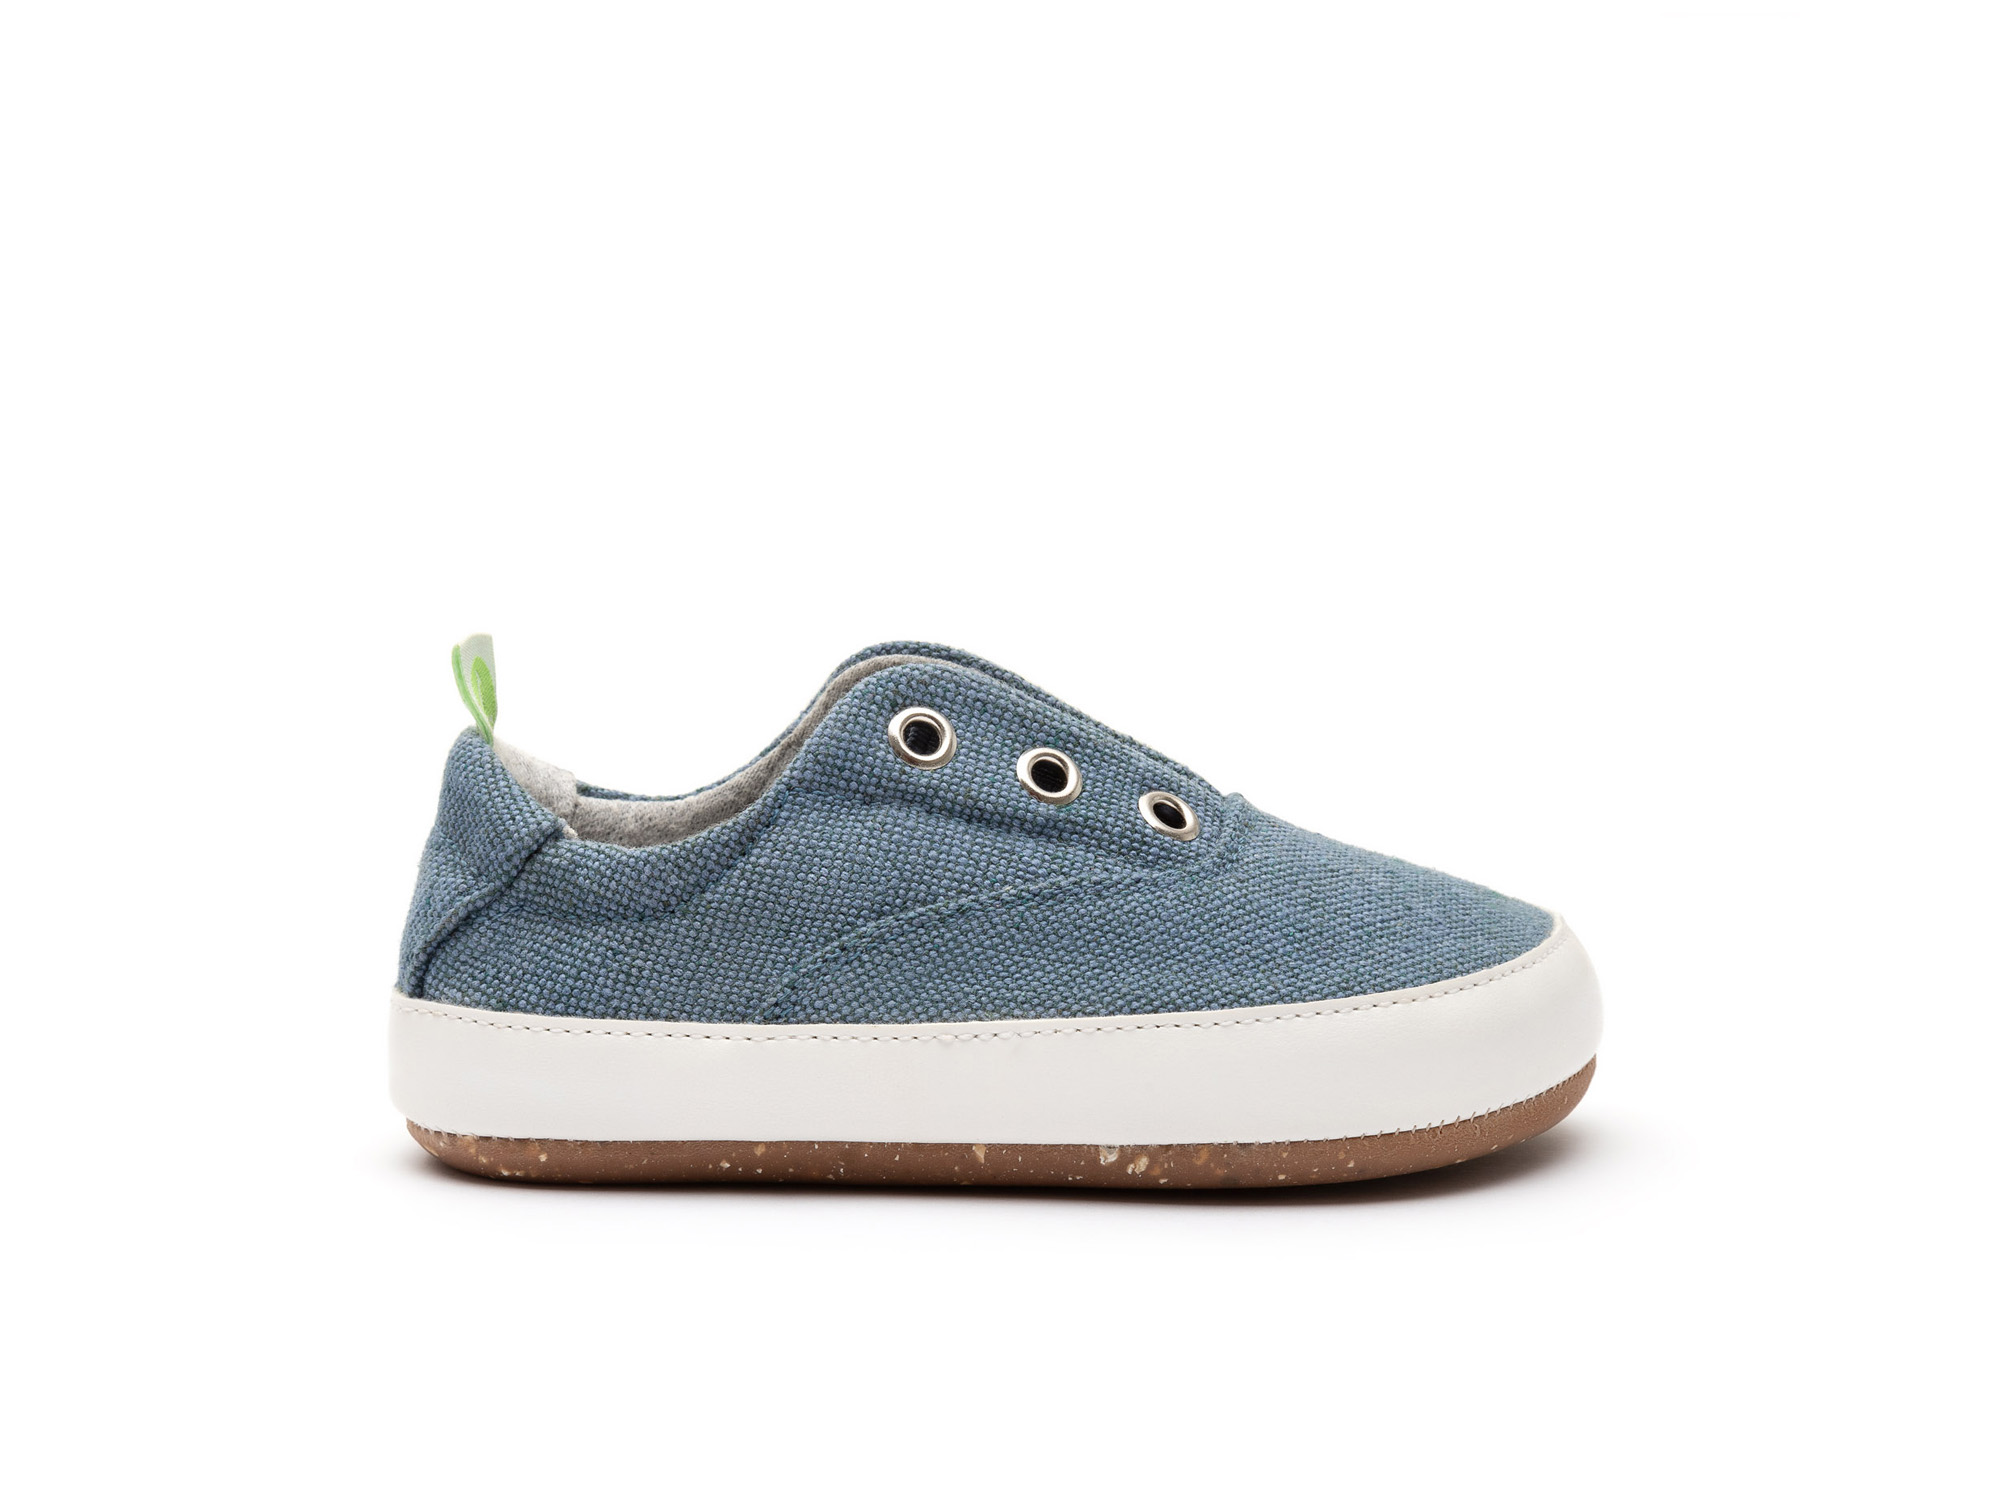 UP & GO Sneakers for Boys Spicey Green | Tip Toey Joey - Australia - 4